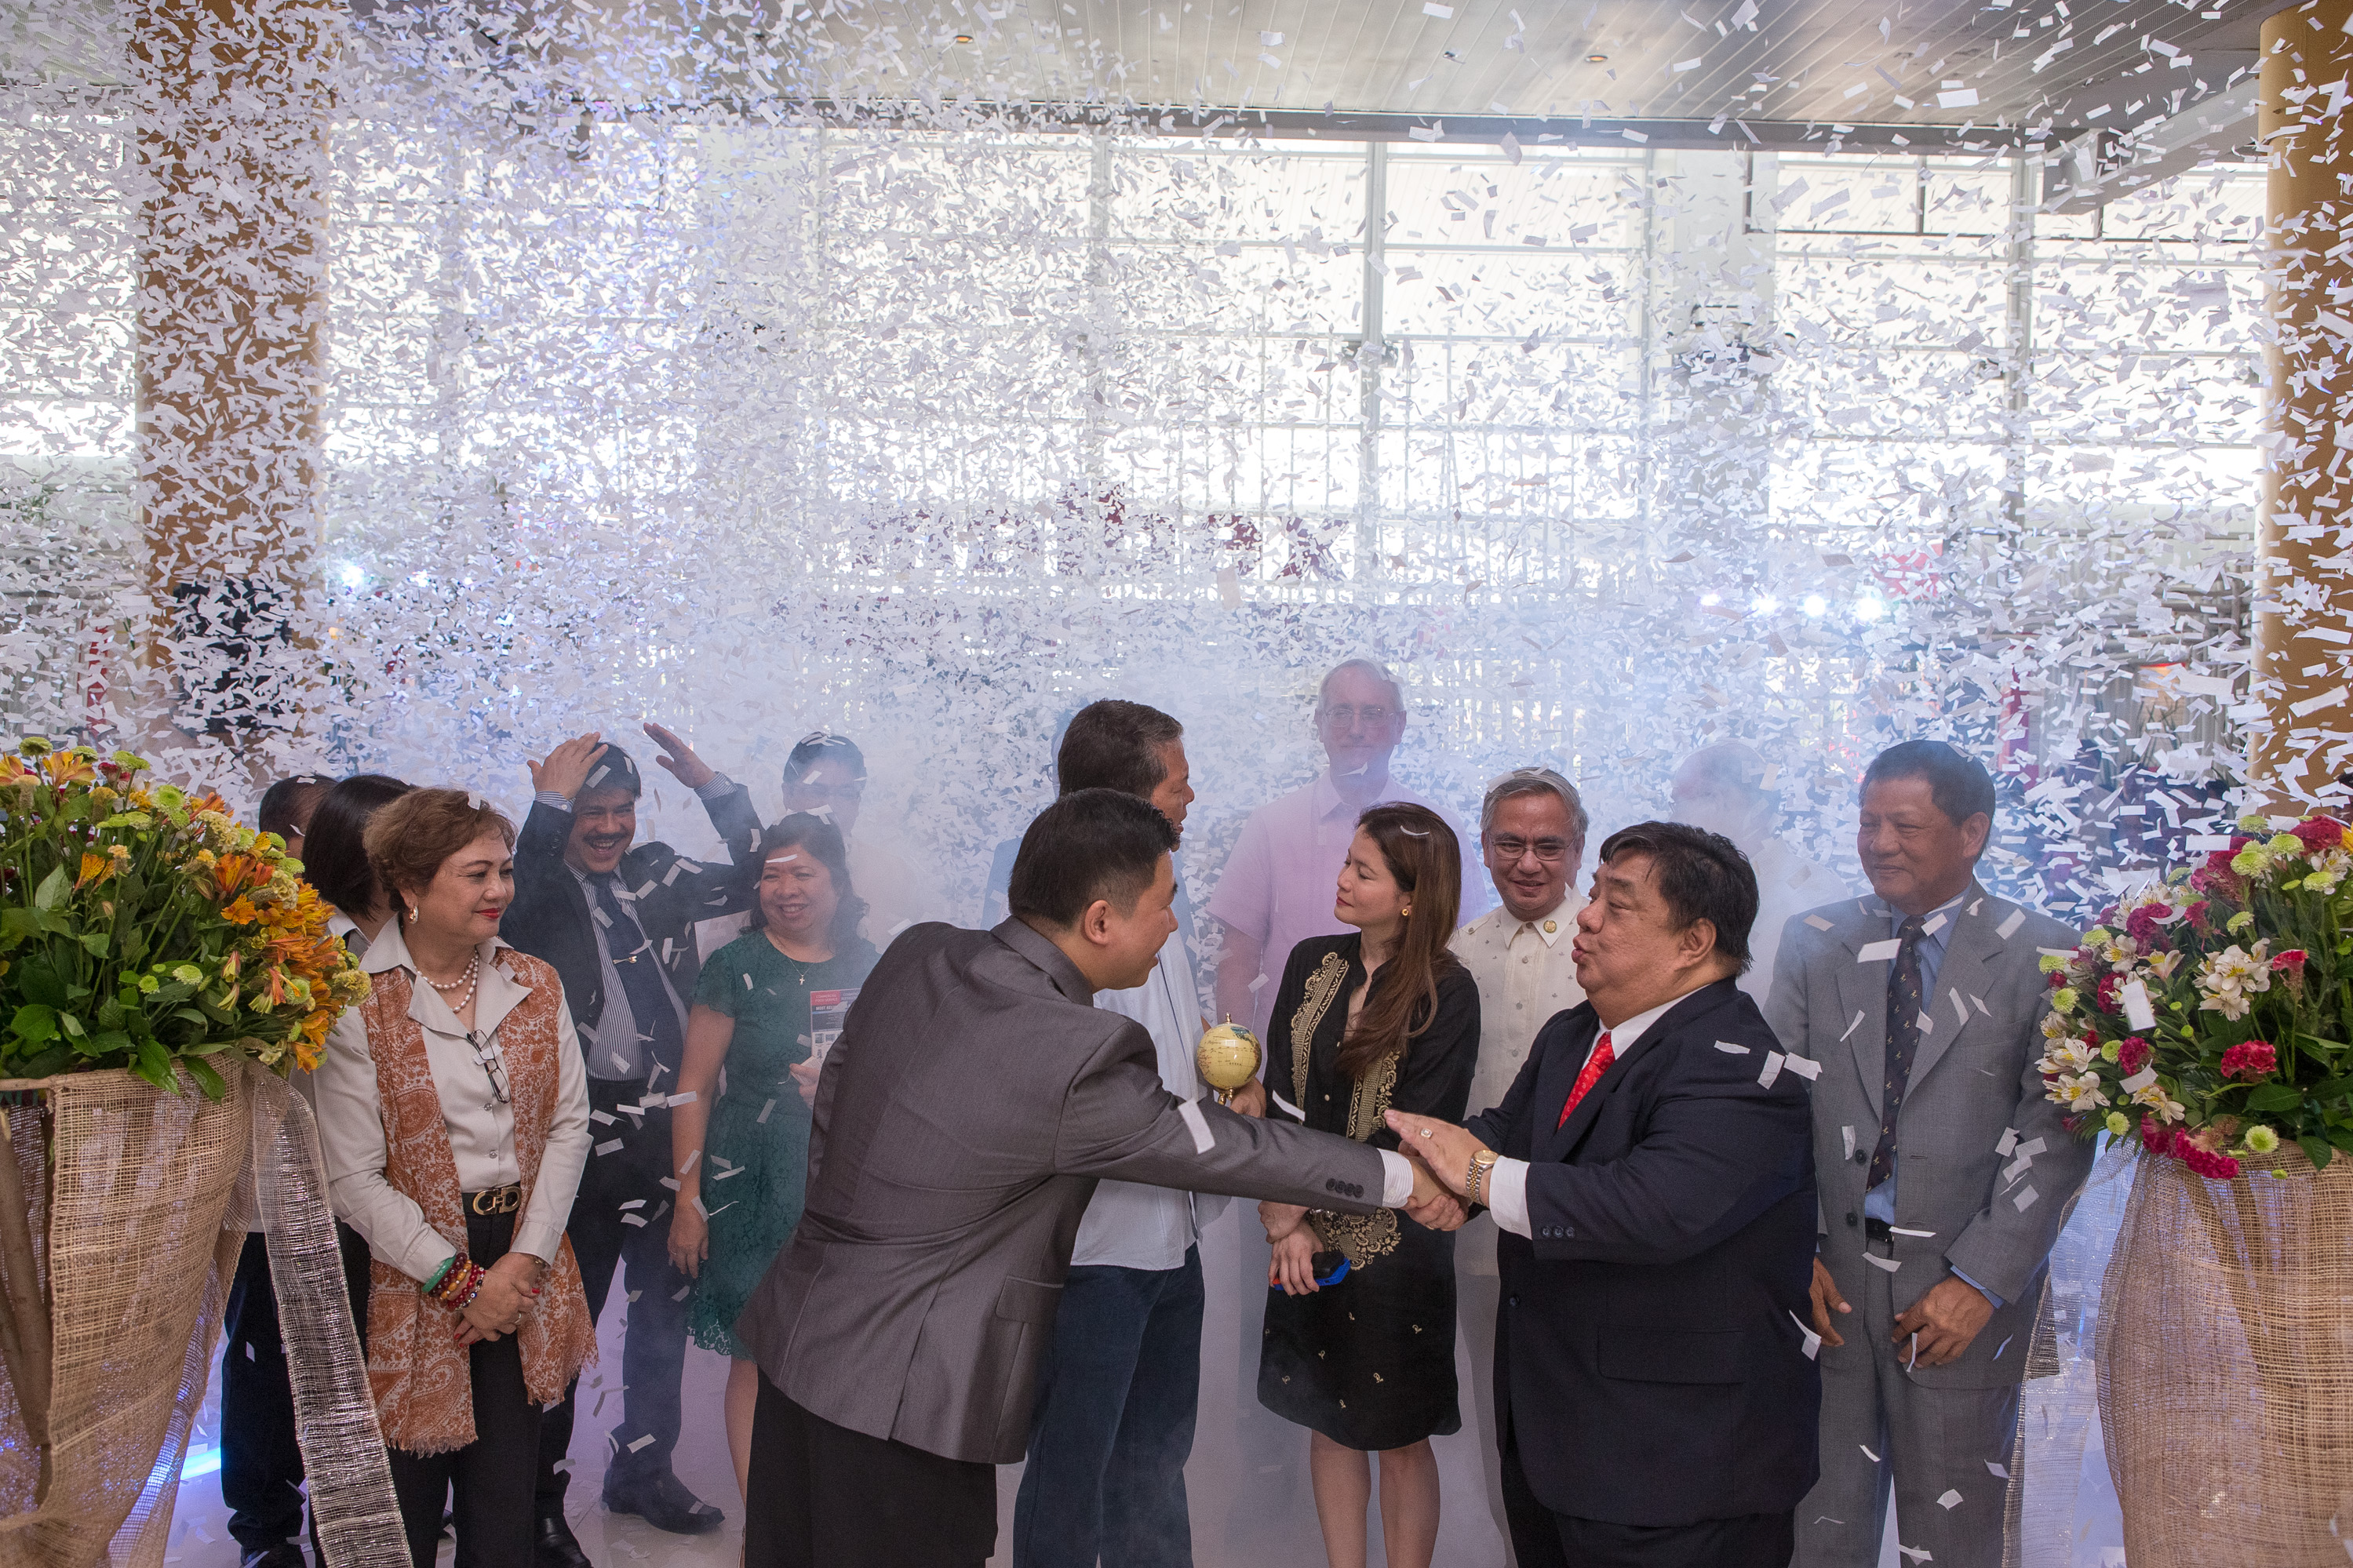 Confetti was released as MAFBEX 2013 was officially opened.